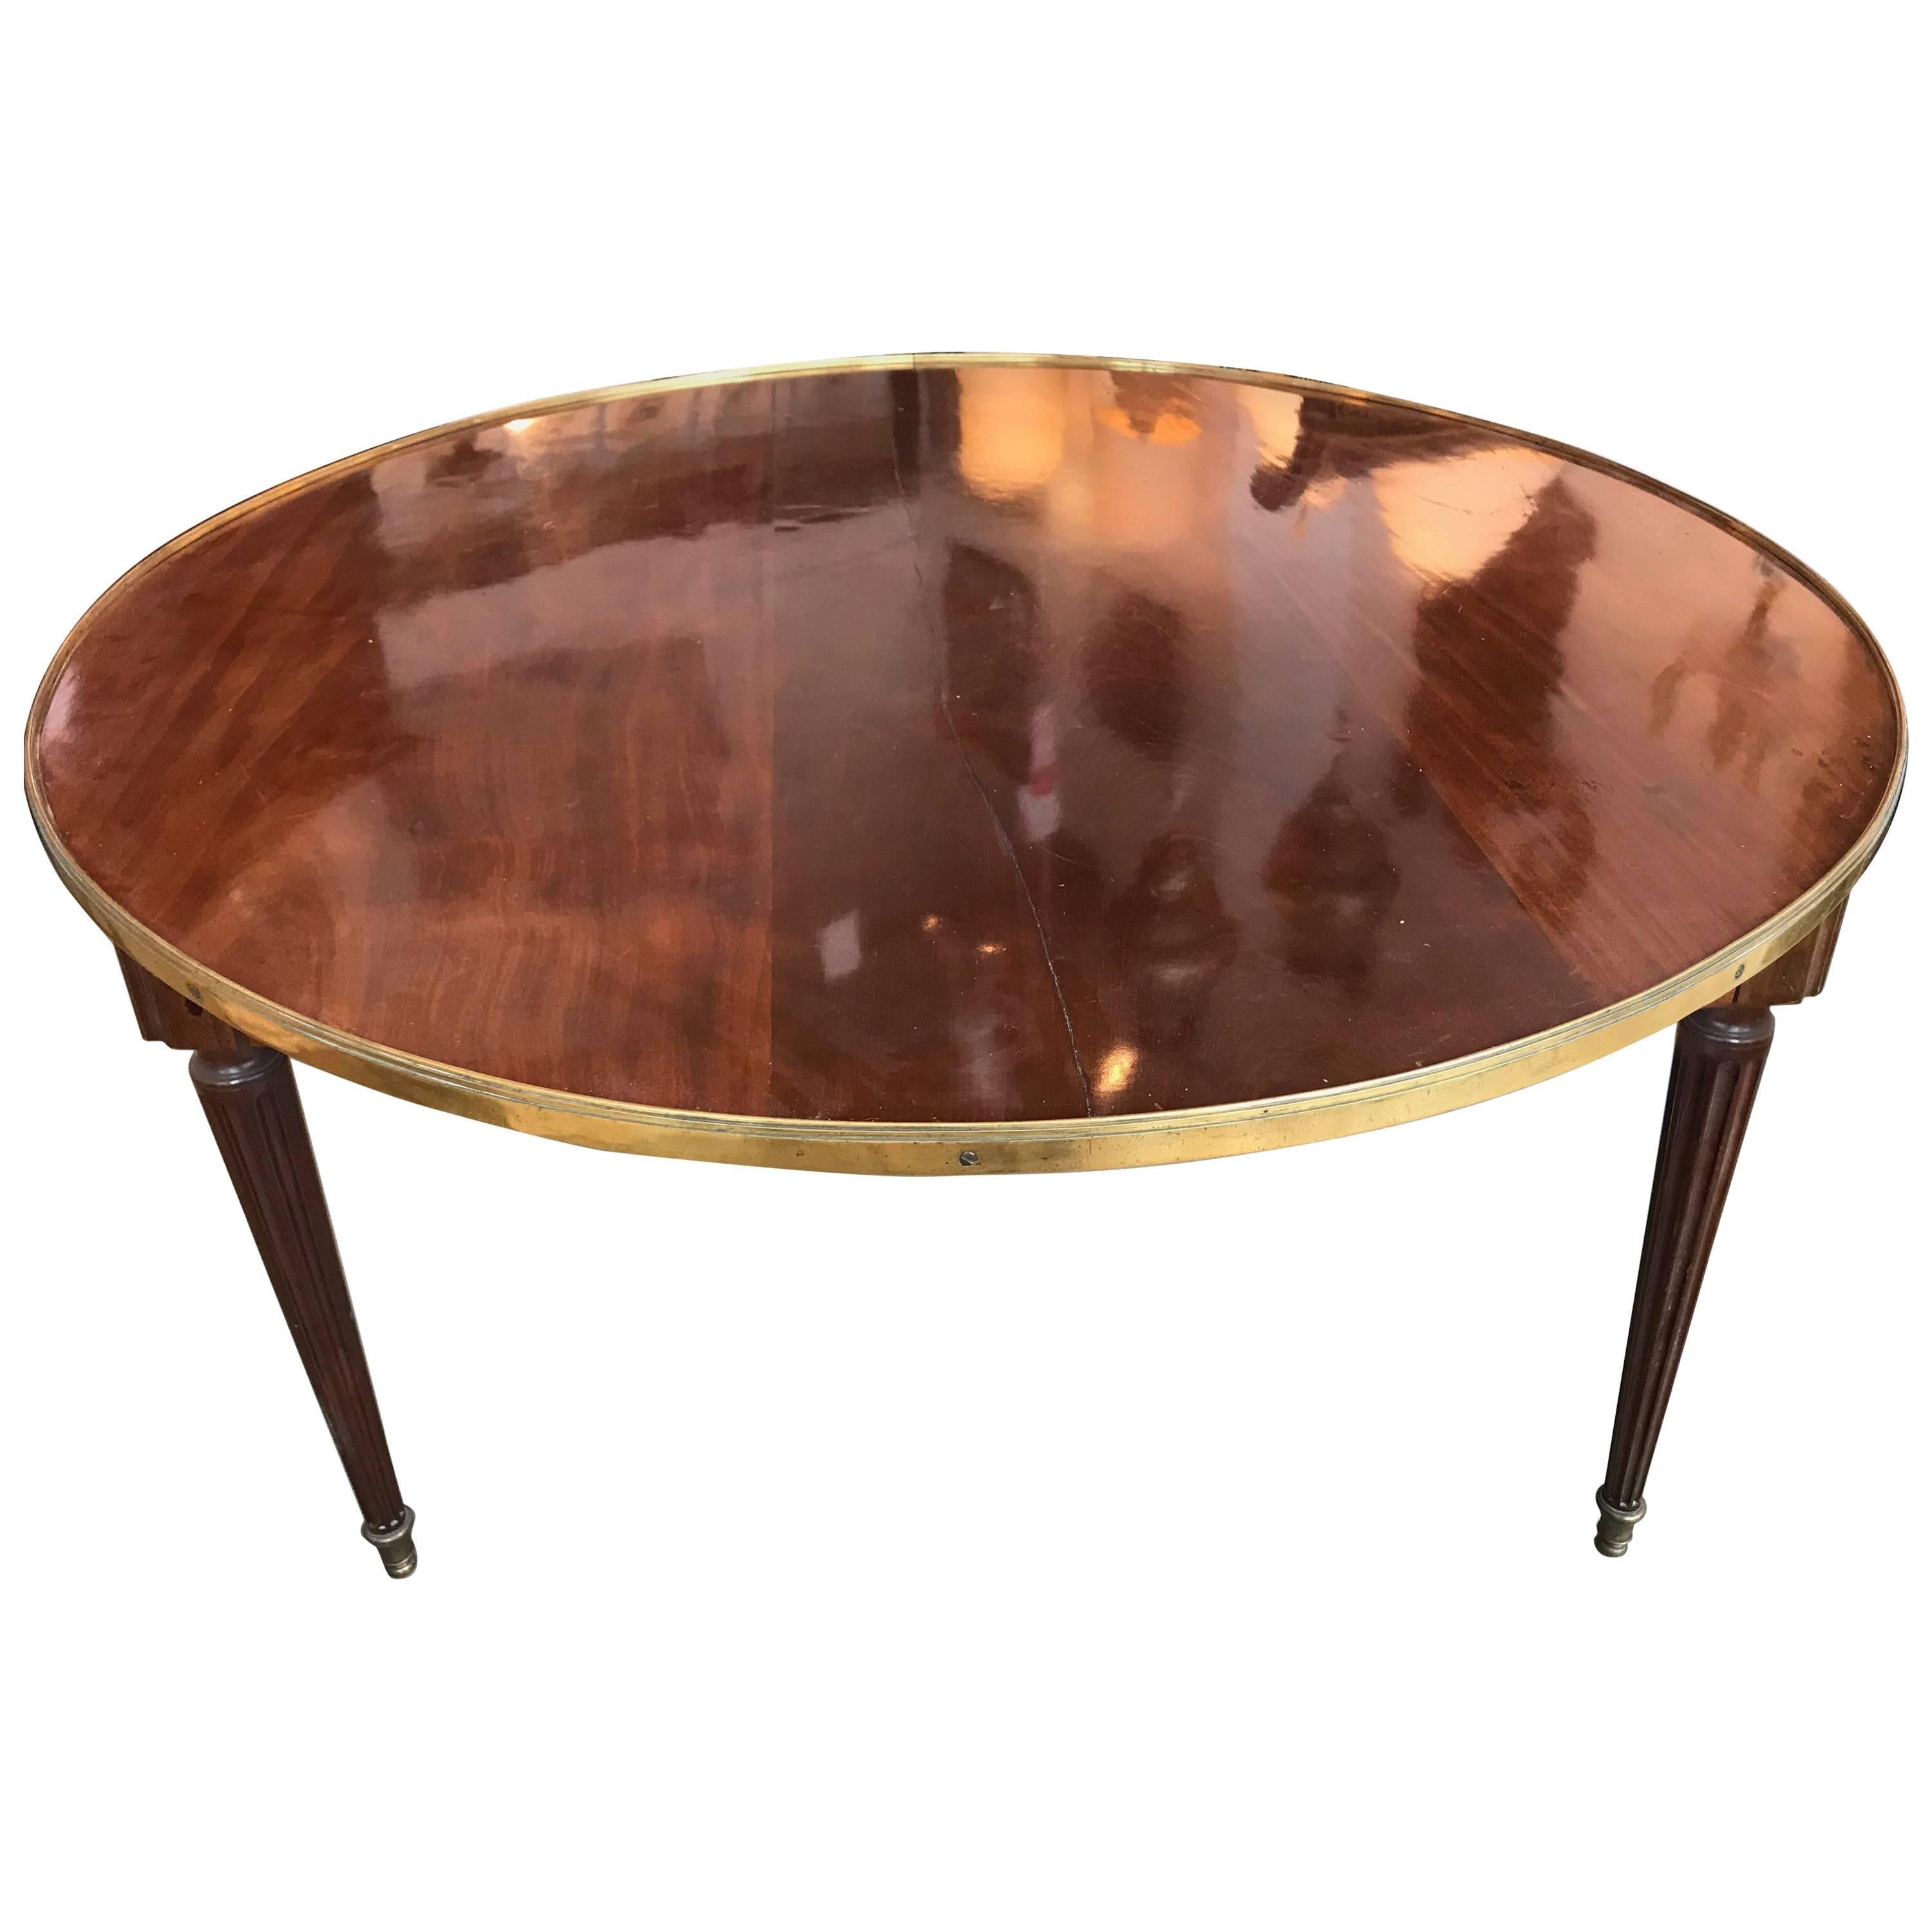 Early 19th Century Period Napoleon Mahogany Campaign Table For Sale